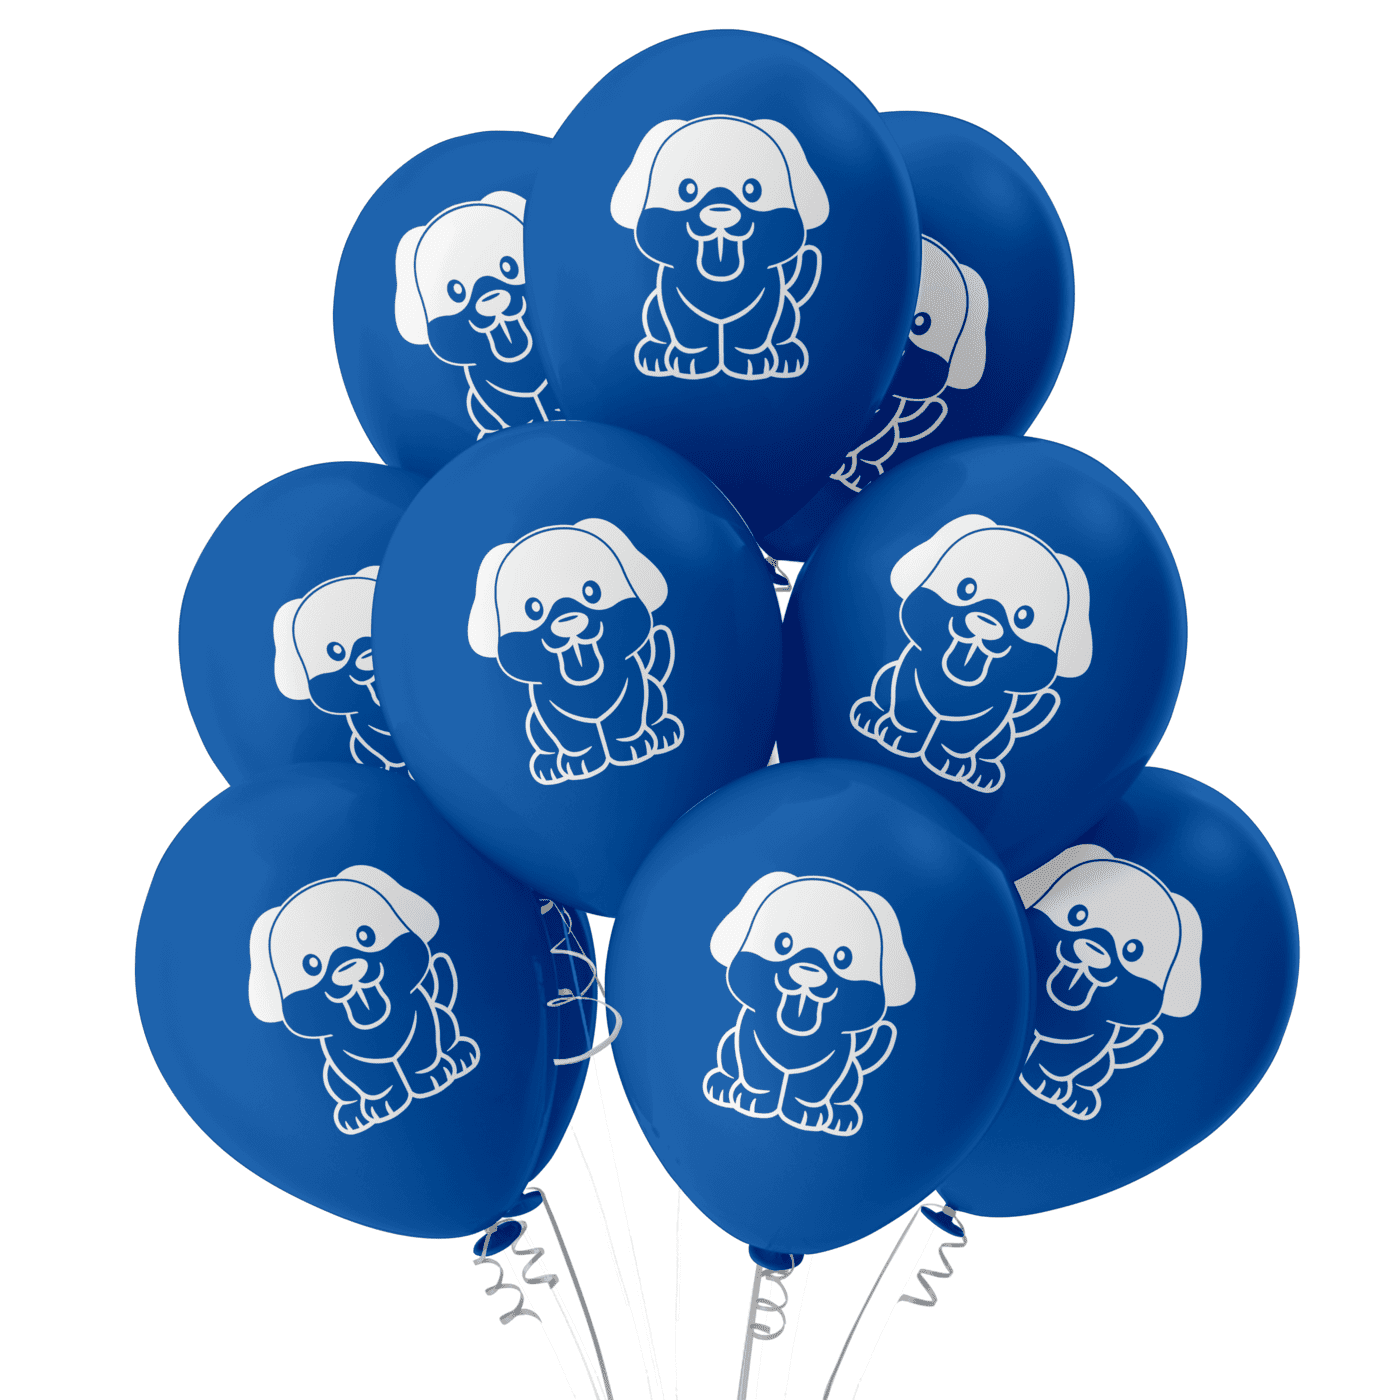 The Magic Balloons - Dog Theme Birthday Balloons With A Banner Latex Balloons For Dog Birthday Party Pack of 21pcs With Dog Print Perfect For Dog Parties and Dog Lovers Party Suppliers